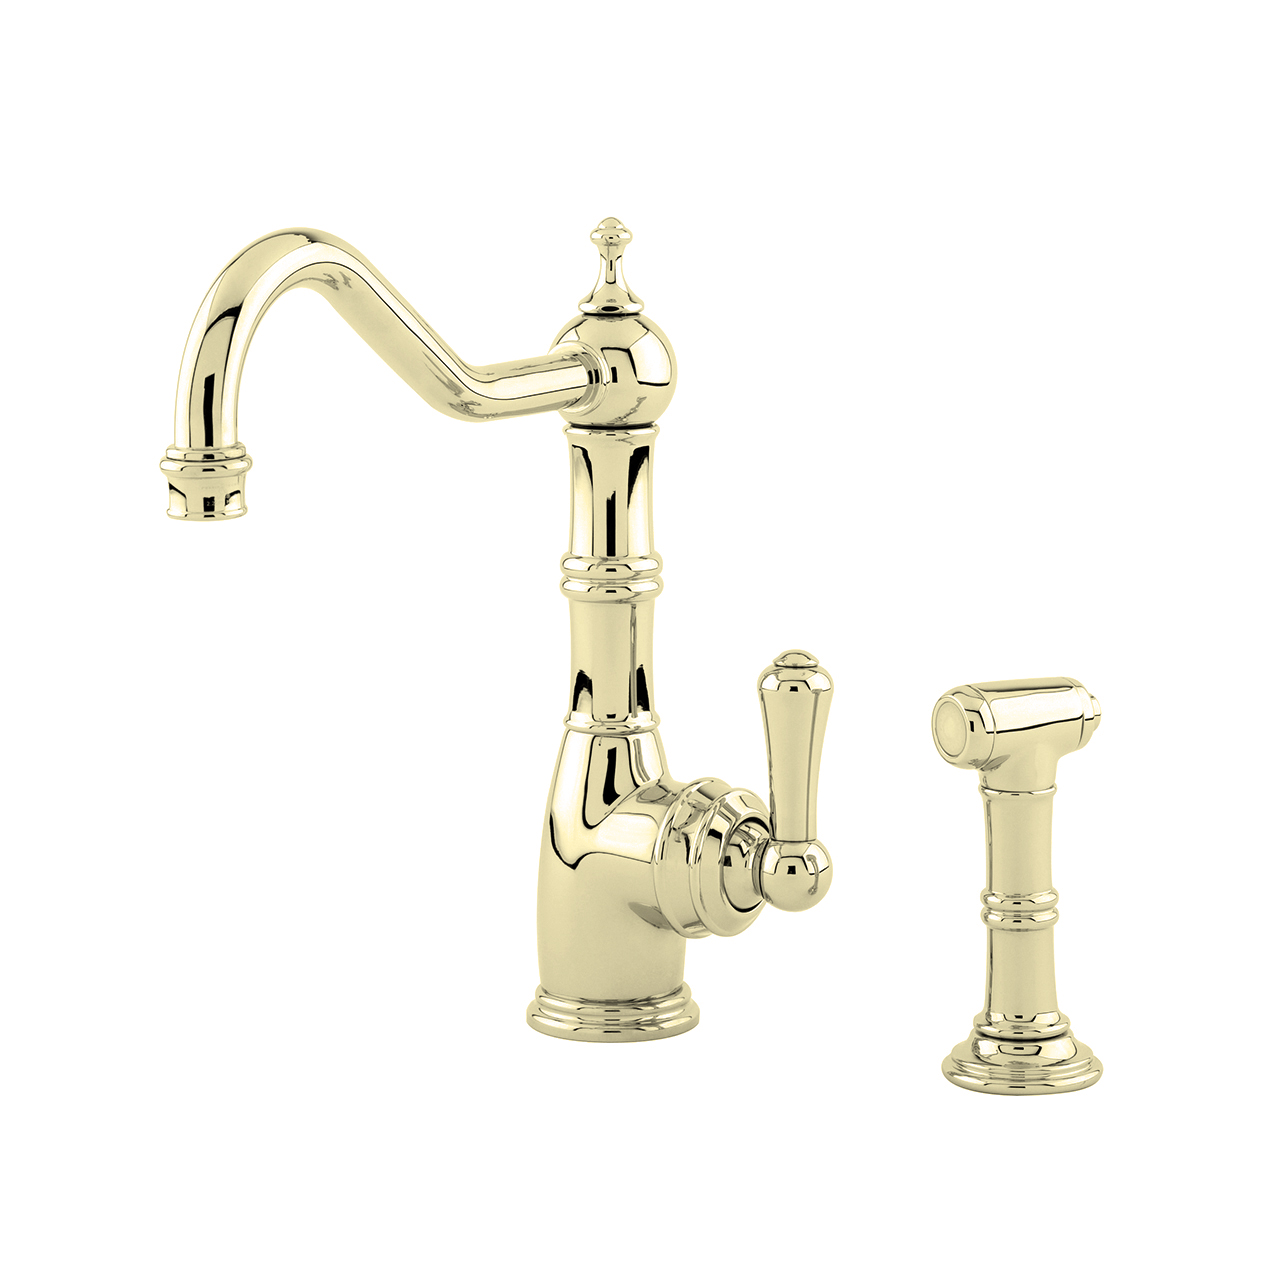 Perrin Rowe Aquitaine Country One Hole Mixer With Single Metal Lever And Spray Rinse The English Tapware Company